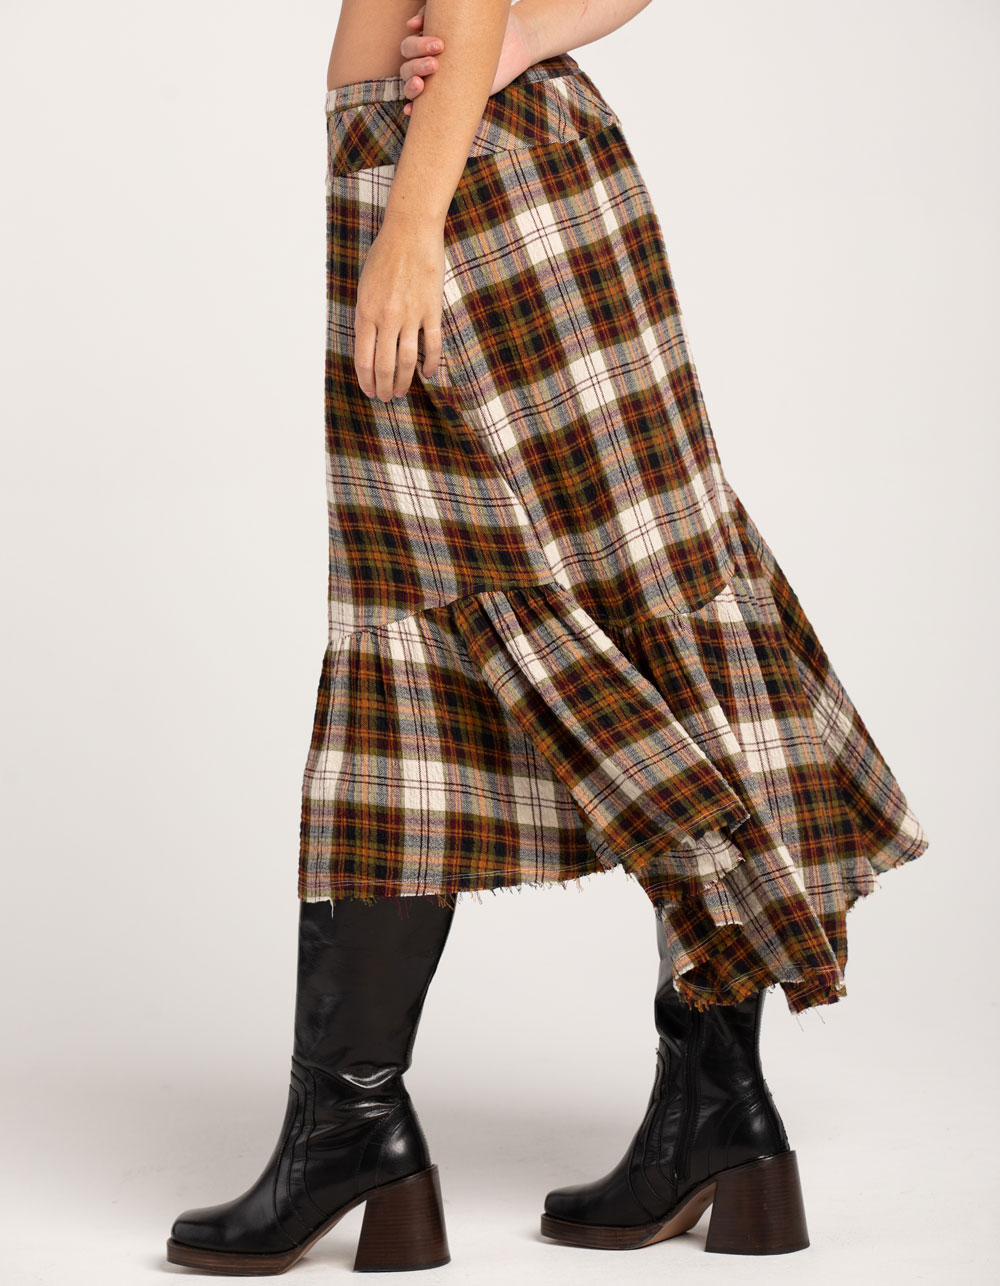 FREE PEOPLE Marcelline Womens Maxi Skirt - BROWN COMBO